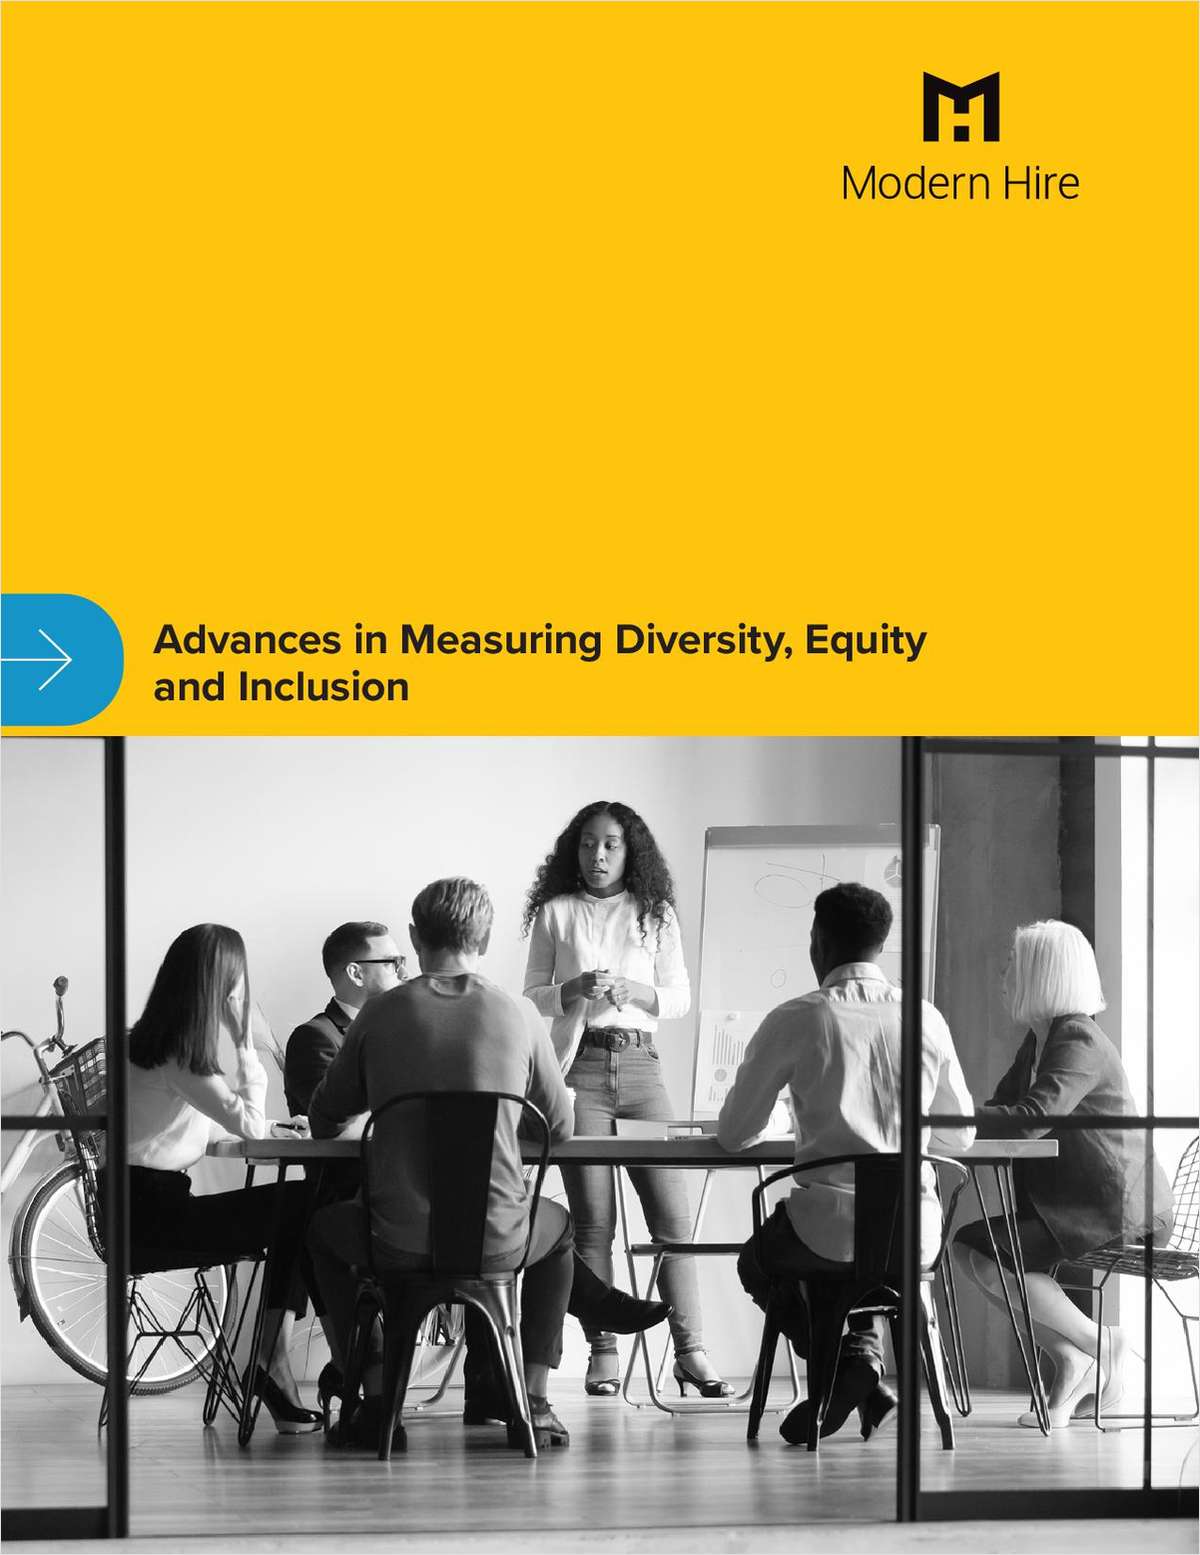 Measuring diversity, equity, and inclusion